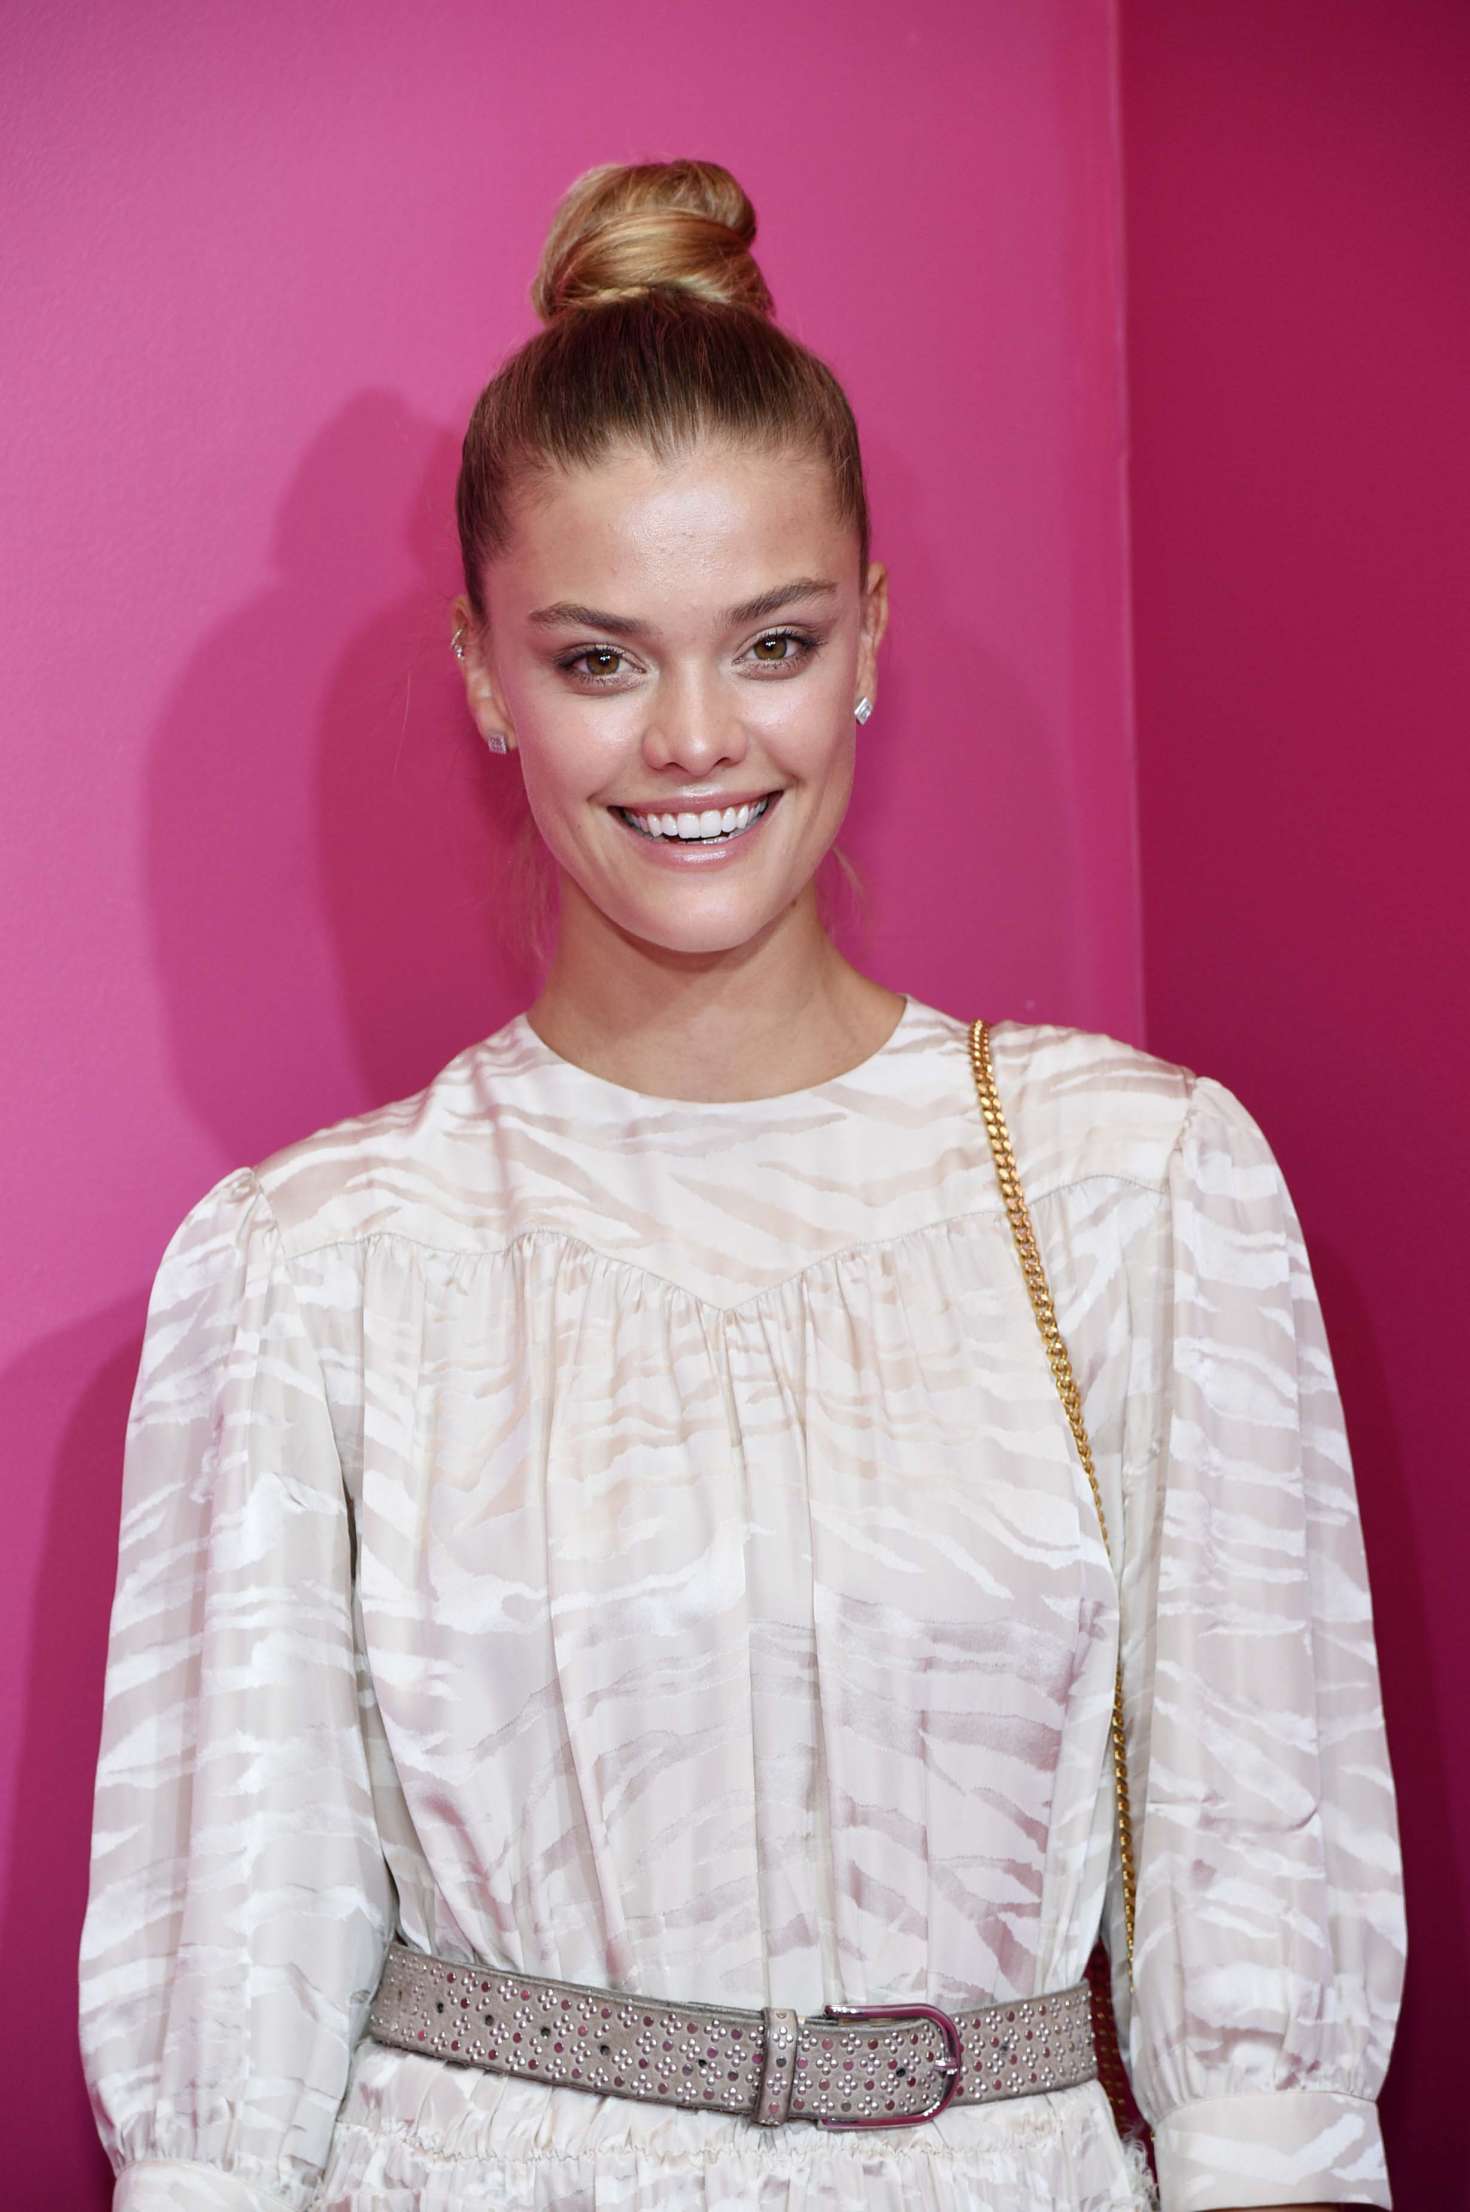 Nina Agdal â€“ A Human Launch Event in New York City